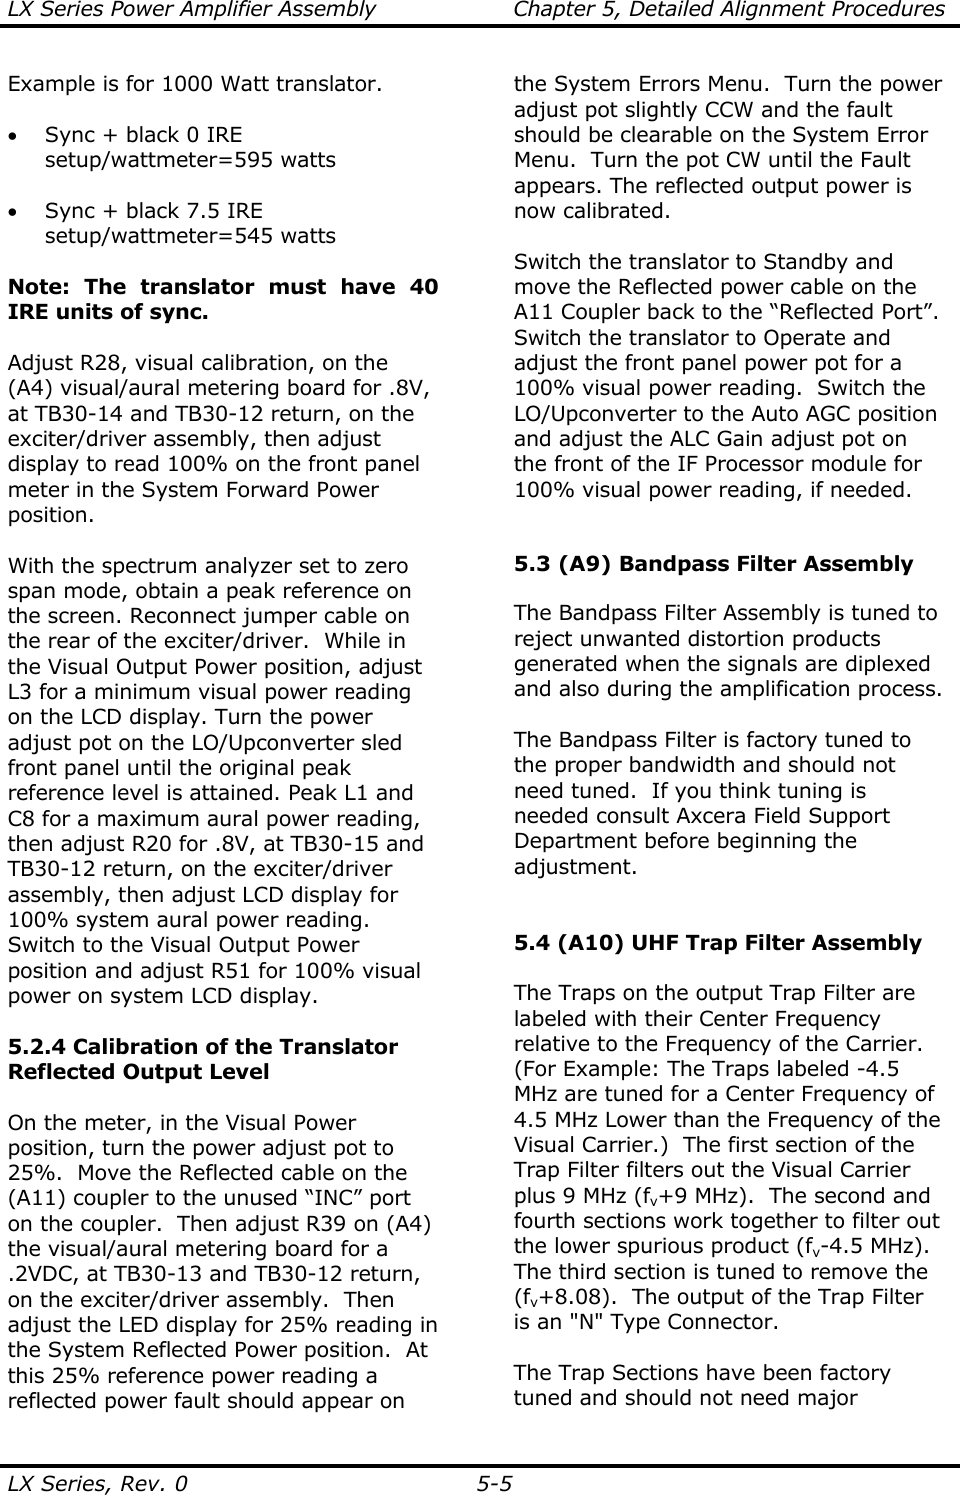 LX Series Power Amplifier Assembly  Chapter 5, Detailed Alignment Procedures  LX Series, Rev. 0  5-5 Example is for 1000 Watt translator.  • Sync + black 0 IRE setup/wattmeter=595 watts  • Sync + black 7.5 IRE setup/wattmeter=545 watts    Note: The translator must have 40 IRE units of sync.   Adjust R28, visual calibration, on the (A4) visual/aural metering board for .8V, at TB30-14 and TB30-12 return, on the exciter/driver assembly, then adjust display to read 100% on the front panel meter in the System Forward Power position.  With the spectrum analyzer set to zero span mode, obtain a peak reference on the screen. Reconnect jumper cable on the rear of the exciter/driver.  While in the Visual Output Power position, adjust L3 for a minimum visual power reading on the LCD display. Turn the power adjust pot on the LO/Upconverter sled front panel until the original peak reference level is attained. Peak L1 and C8 for a maximum aural power reading, then adjust R20 for .8V, at TB30-15 and TB30-12 return, on the exciter/driver assembly, then adjust LCD display for 100% system aural power reading. Switch to the Visual Output Power position and adjust R51 for 100% visual power on system LCD display.  5.2.4 Calibration of the Translator Reflected Output Level   On the meter, in the Visual Power position, turn the power adjust pot to 25%.  Move the Reflected cable on the (A11) coupler to the unused “INC” port on the coupler.  Then adjust R39 on (A4) the visual/aural metering board for a .2VDC, at TB30-13 and TB30-12 return, on the exciter/driver assembly.  Then adjust the LED display for 25% reading in the System Reflected Power position.  At this 25% reference power reading a reflected power fault should appear on the System Errors Menu.  Turn the power adjust pot slightly CCW and the fault should be clearable on the System Error Menu.  Turn the pot CW until the Fault appears. The reflected output power is now calibrated.    Switch the translator to Standby and move the Reflected power cable on the A11 Coupler back to the “Reflected Port”. Switch the translator to Operate and adjust the front panel power pot for a 100% visual power reading.  Switch the LO/Upconverter to the Auto AGC position and adjust the ALC Gain adjust pot on the front of the IF Processor module for 100% visual power reading, if needed.   5.3 (A9) Bandpass Filter Assembly   The Bandpass Filter Assembly is tuned to reject unwanted distortion products generated when the signals are diplexed and also during the amplification process.  The Bandpass Filter is factory tuned to the proper bandwidth and should not need tuned.  If you think tuning is needed consult Axcera Field Support Department before beginning the adjustment.   5.4 (A10) UHF Trap Filter Assembly  The Traps on the output Trap Filter are labeled with their Center Frequency relative to the Frequency of the Carrier.  (For Example: The Traps labeled -4.5 MHz are tuned for a Center Frequency of 4.5 MHz Lower than the Frequency of the Visual Carrier.)  The first section of the Trap Filter filters out the Visual Carrier plus 9 MHz (fv+9 MHz).  The second and fourth sections work together to filter out the lower spurious product (fv-4.5 MHz).  The third section is tuned to remove the (fv+8.08).  The output of the Trap Filter is an &quot;N&quot; Type Connector.  The Trap Sections have been factory tuned and should not need major 